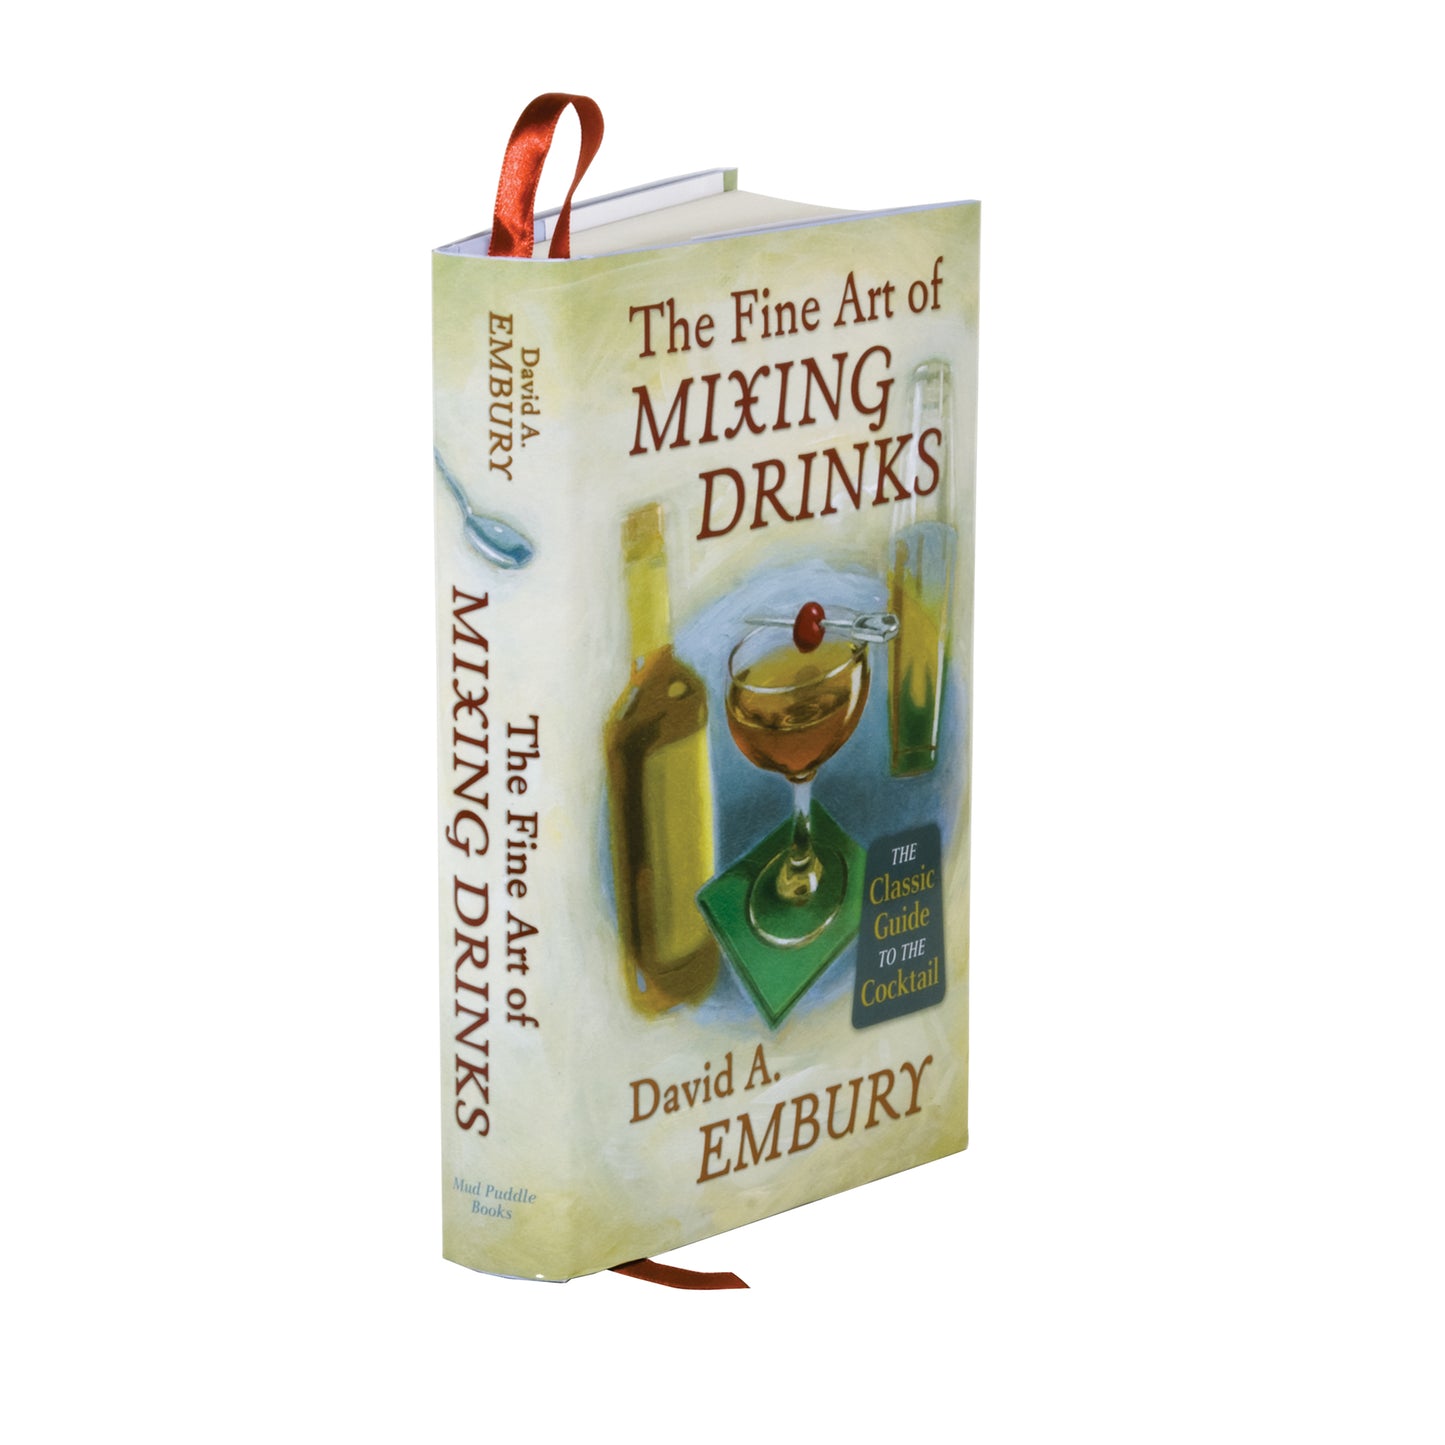 THE FINE ART OF MIXING DRINKS BY DAVID A. EMBURY